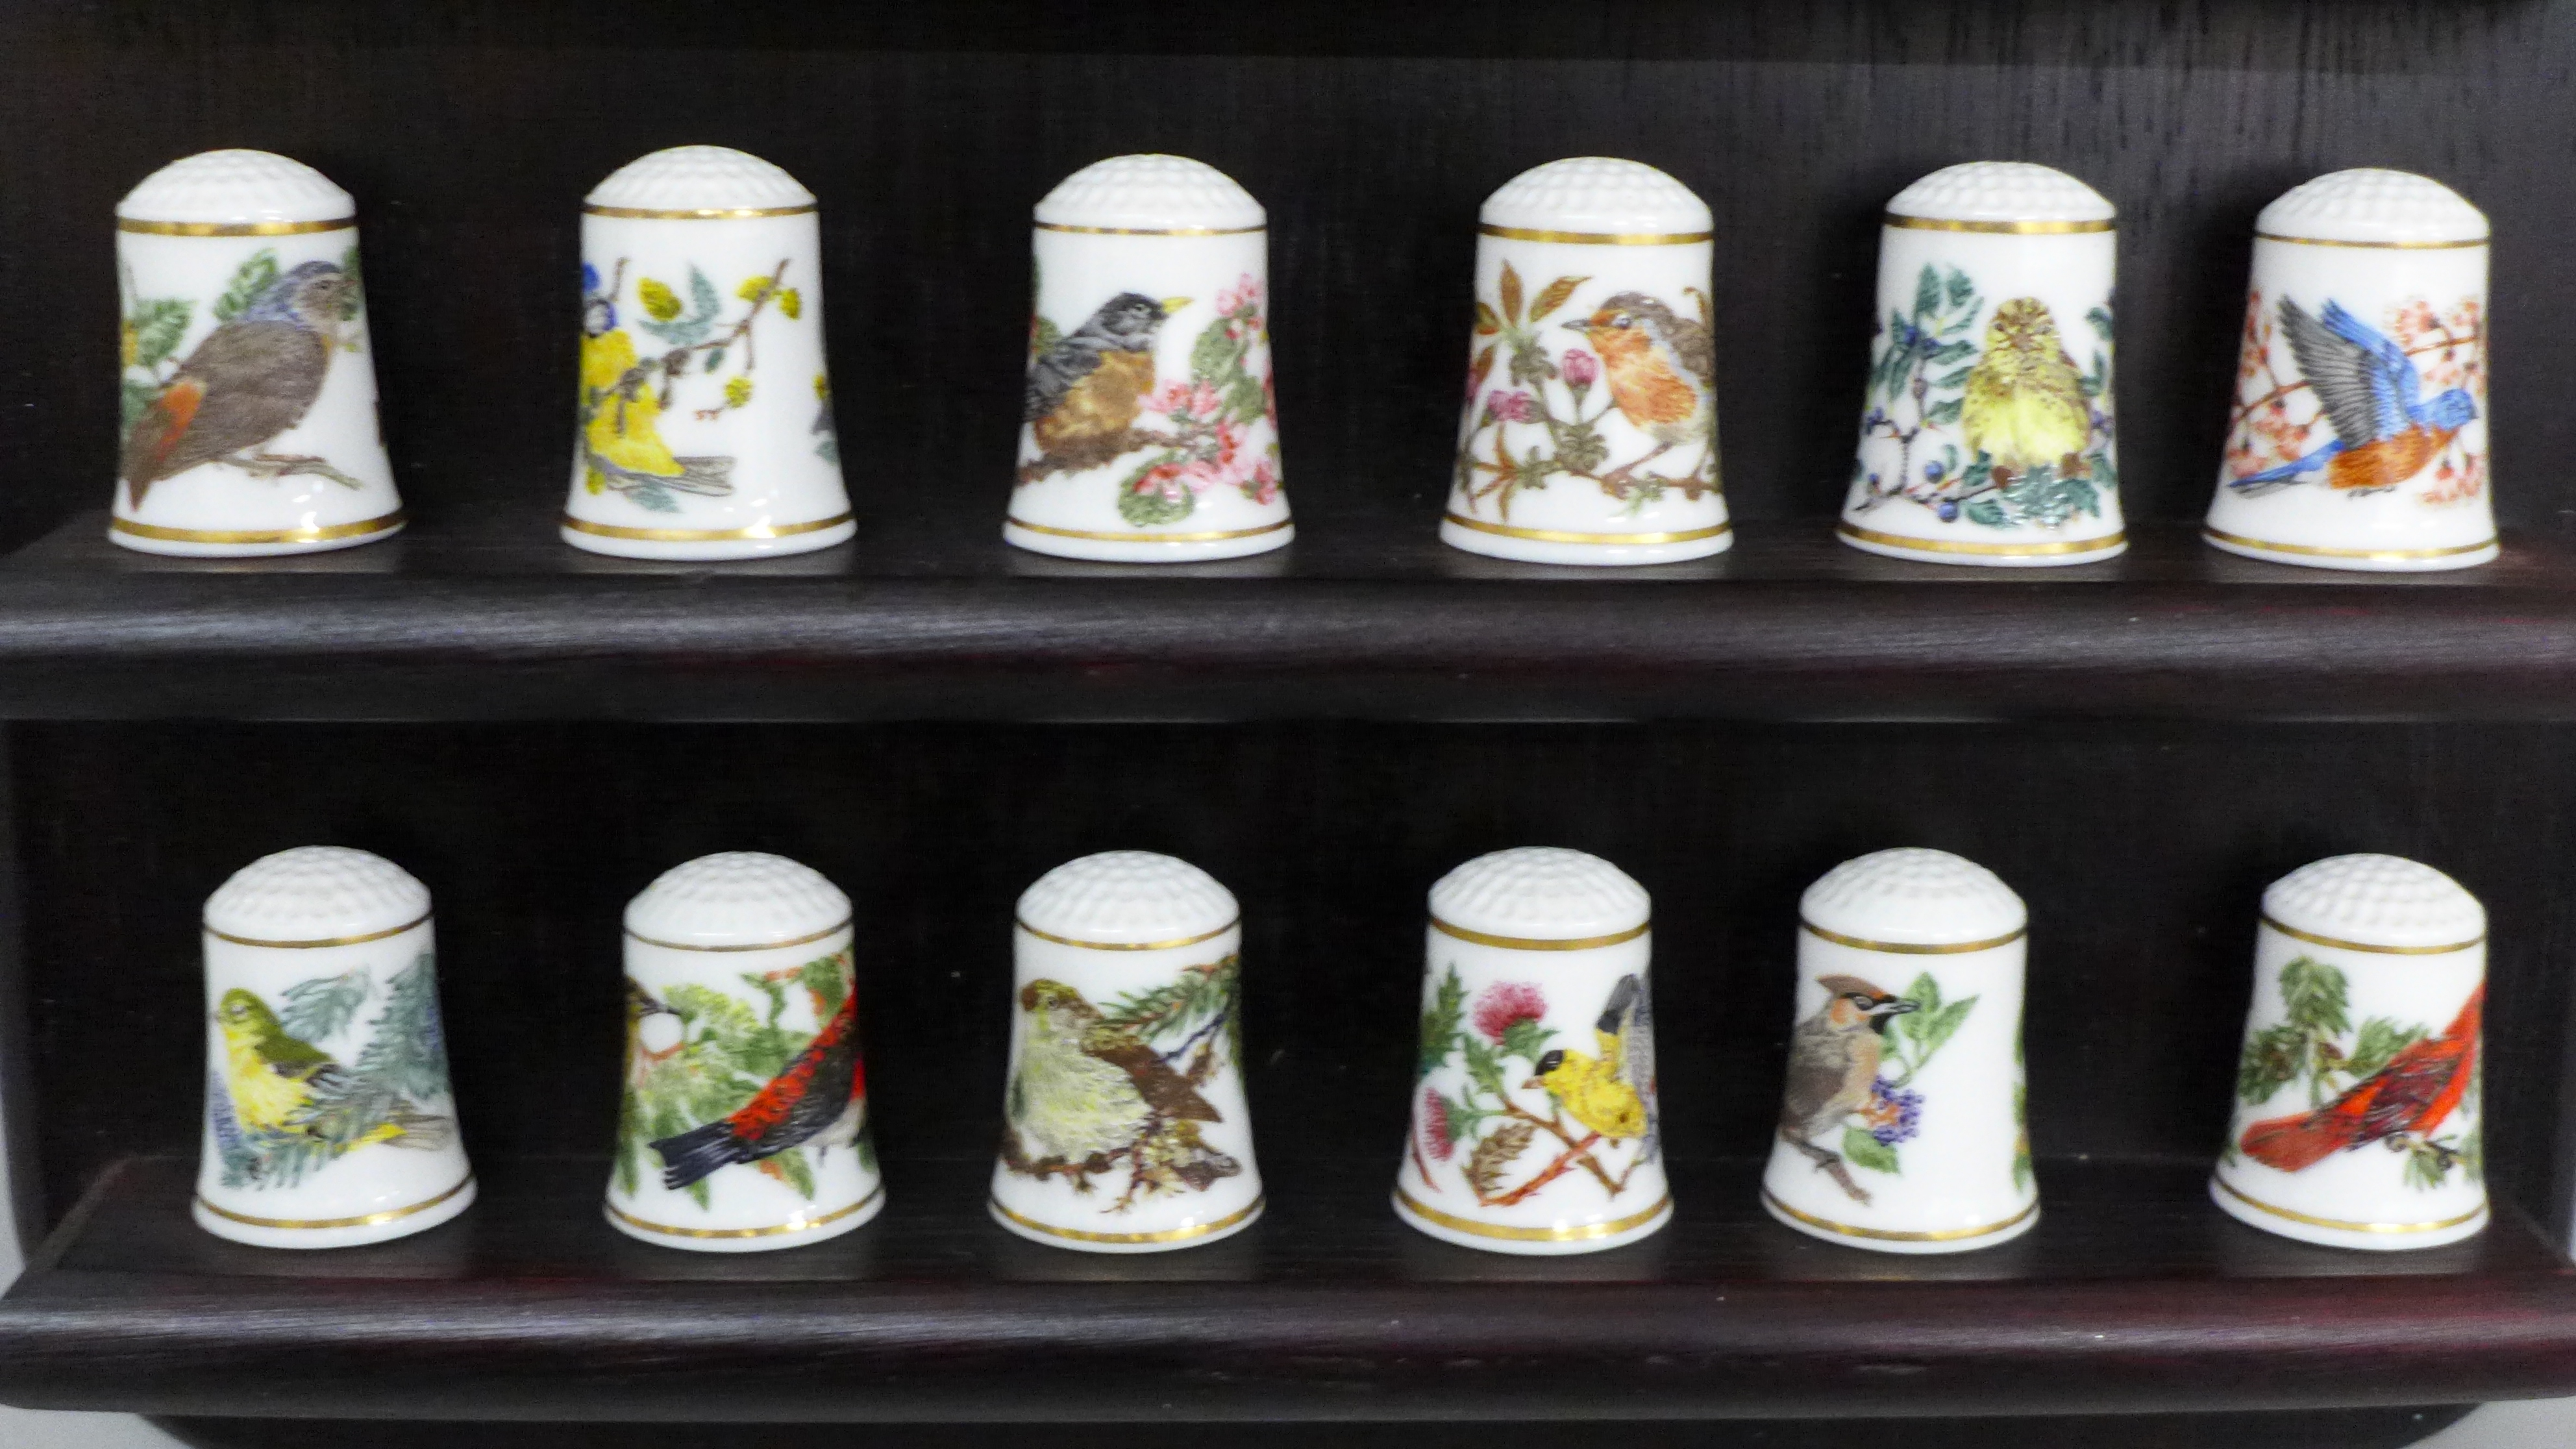 A Franklin Mint set of thimbles, Songbirds of the World, 22 thimbles on a wooden stand - Image 3 of 4